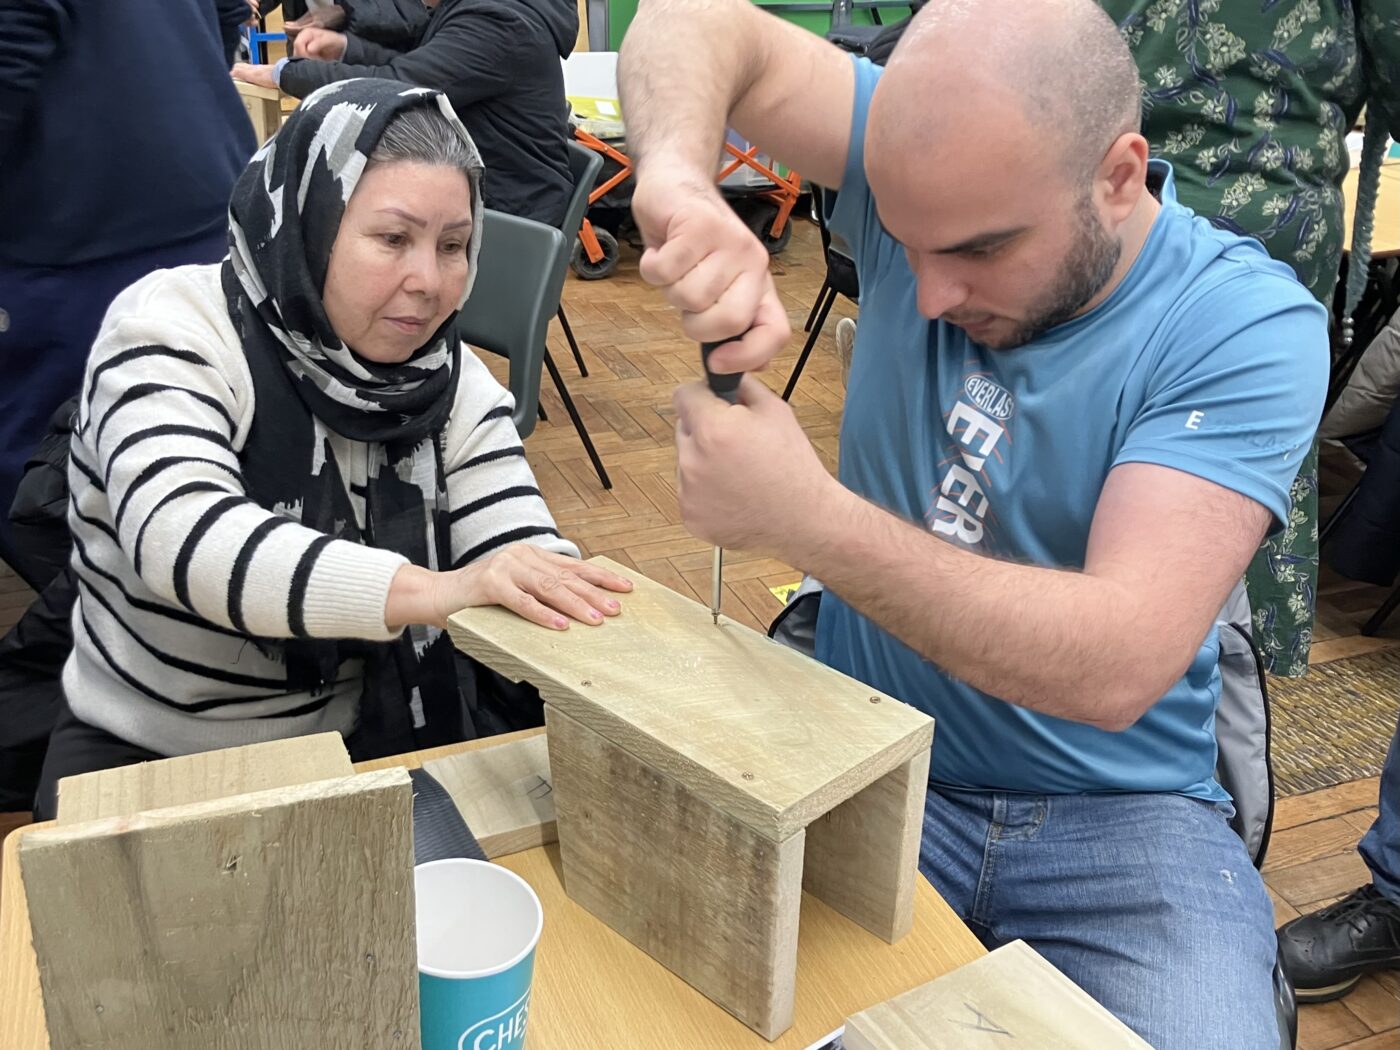 A human female wearing a black head scarf and a black and white stripey top hold a wooden bird box on a table whilst a human male wearing a blue tshirt usese a screw driver to fix the box together using screws.